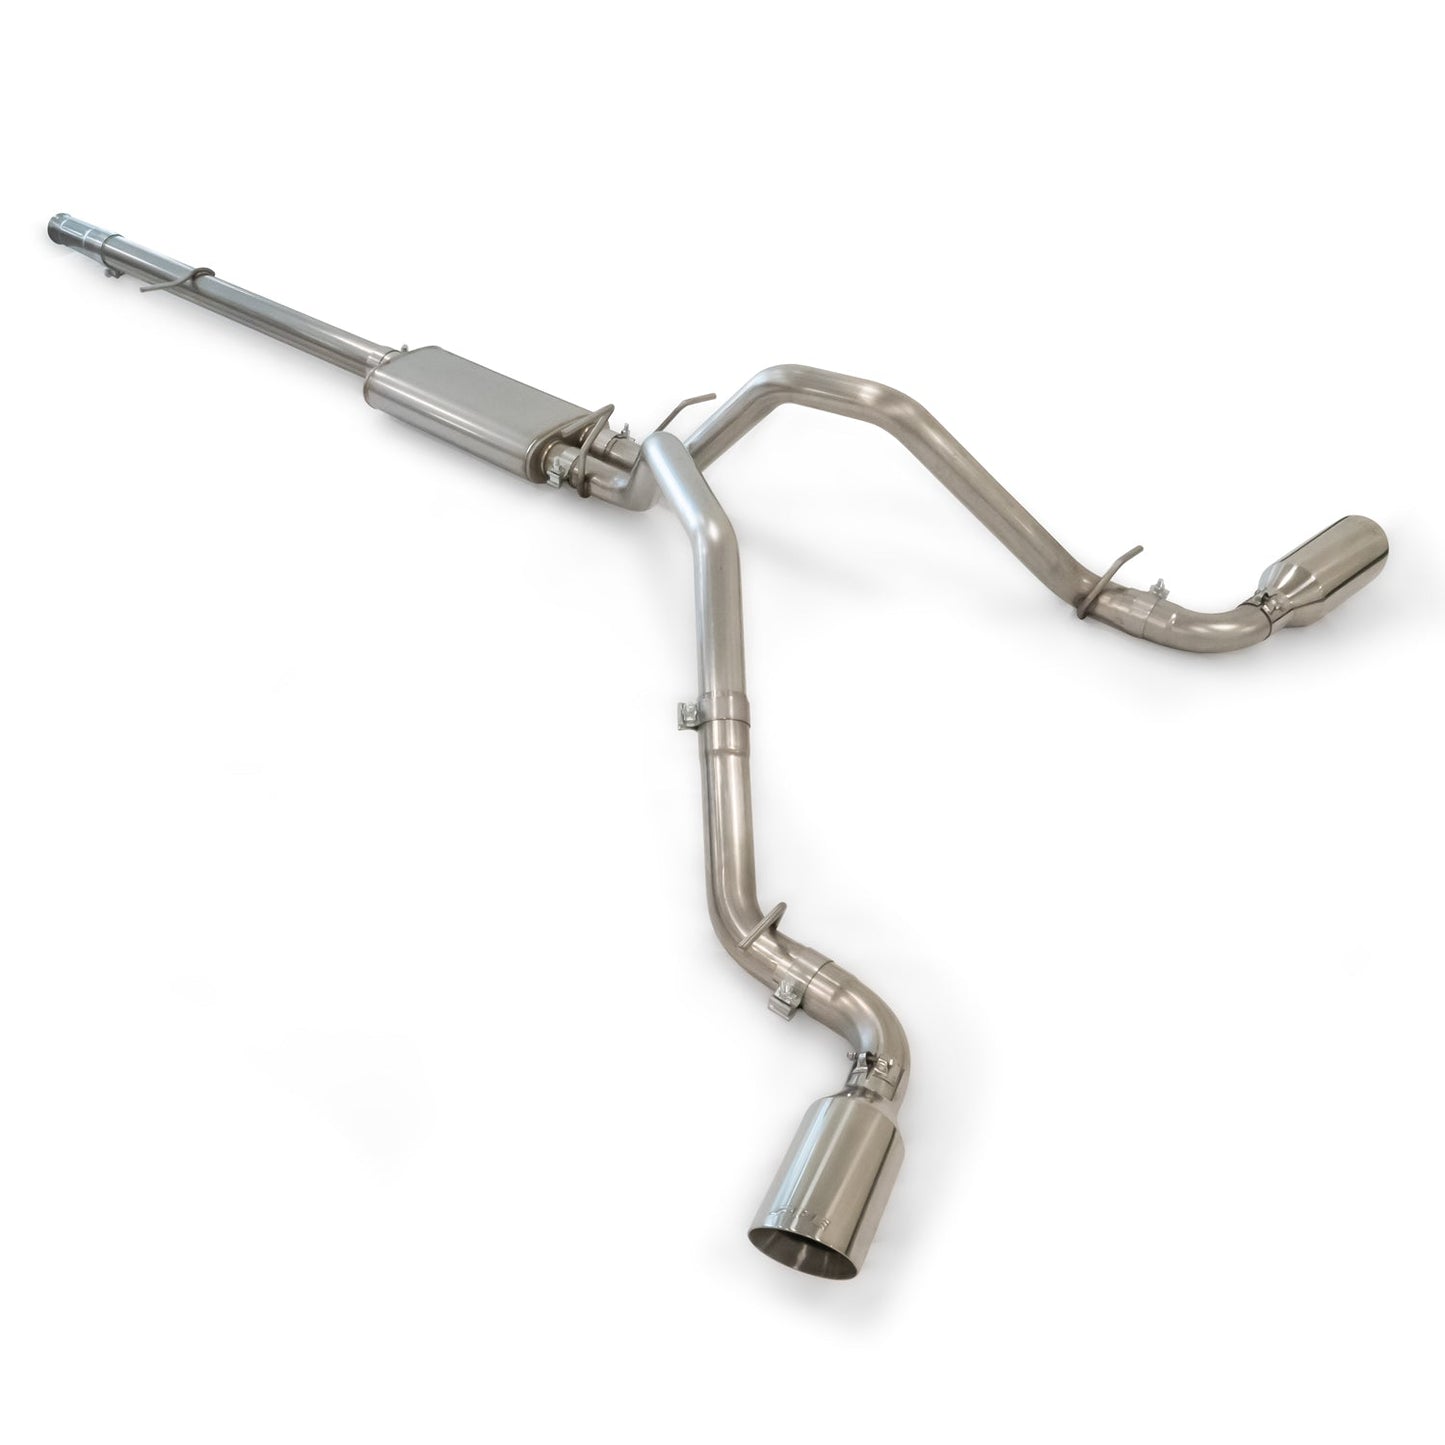 2009-2013 GM 1500 Cat Back Exhaust Systems